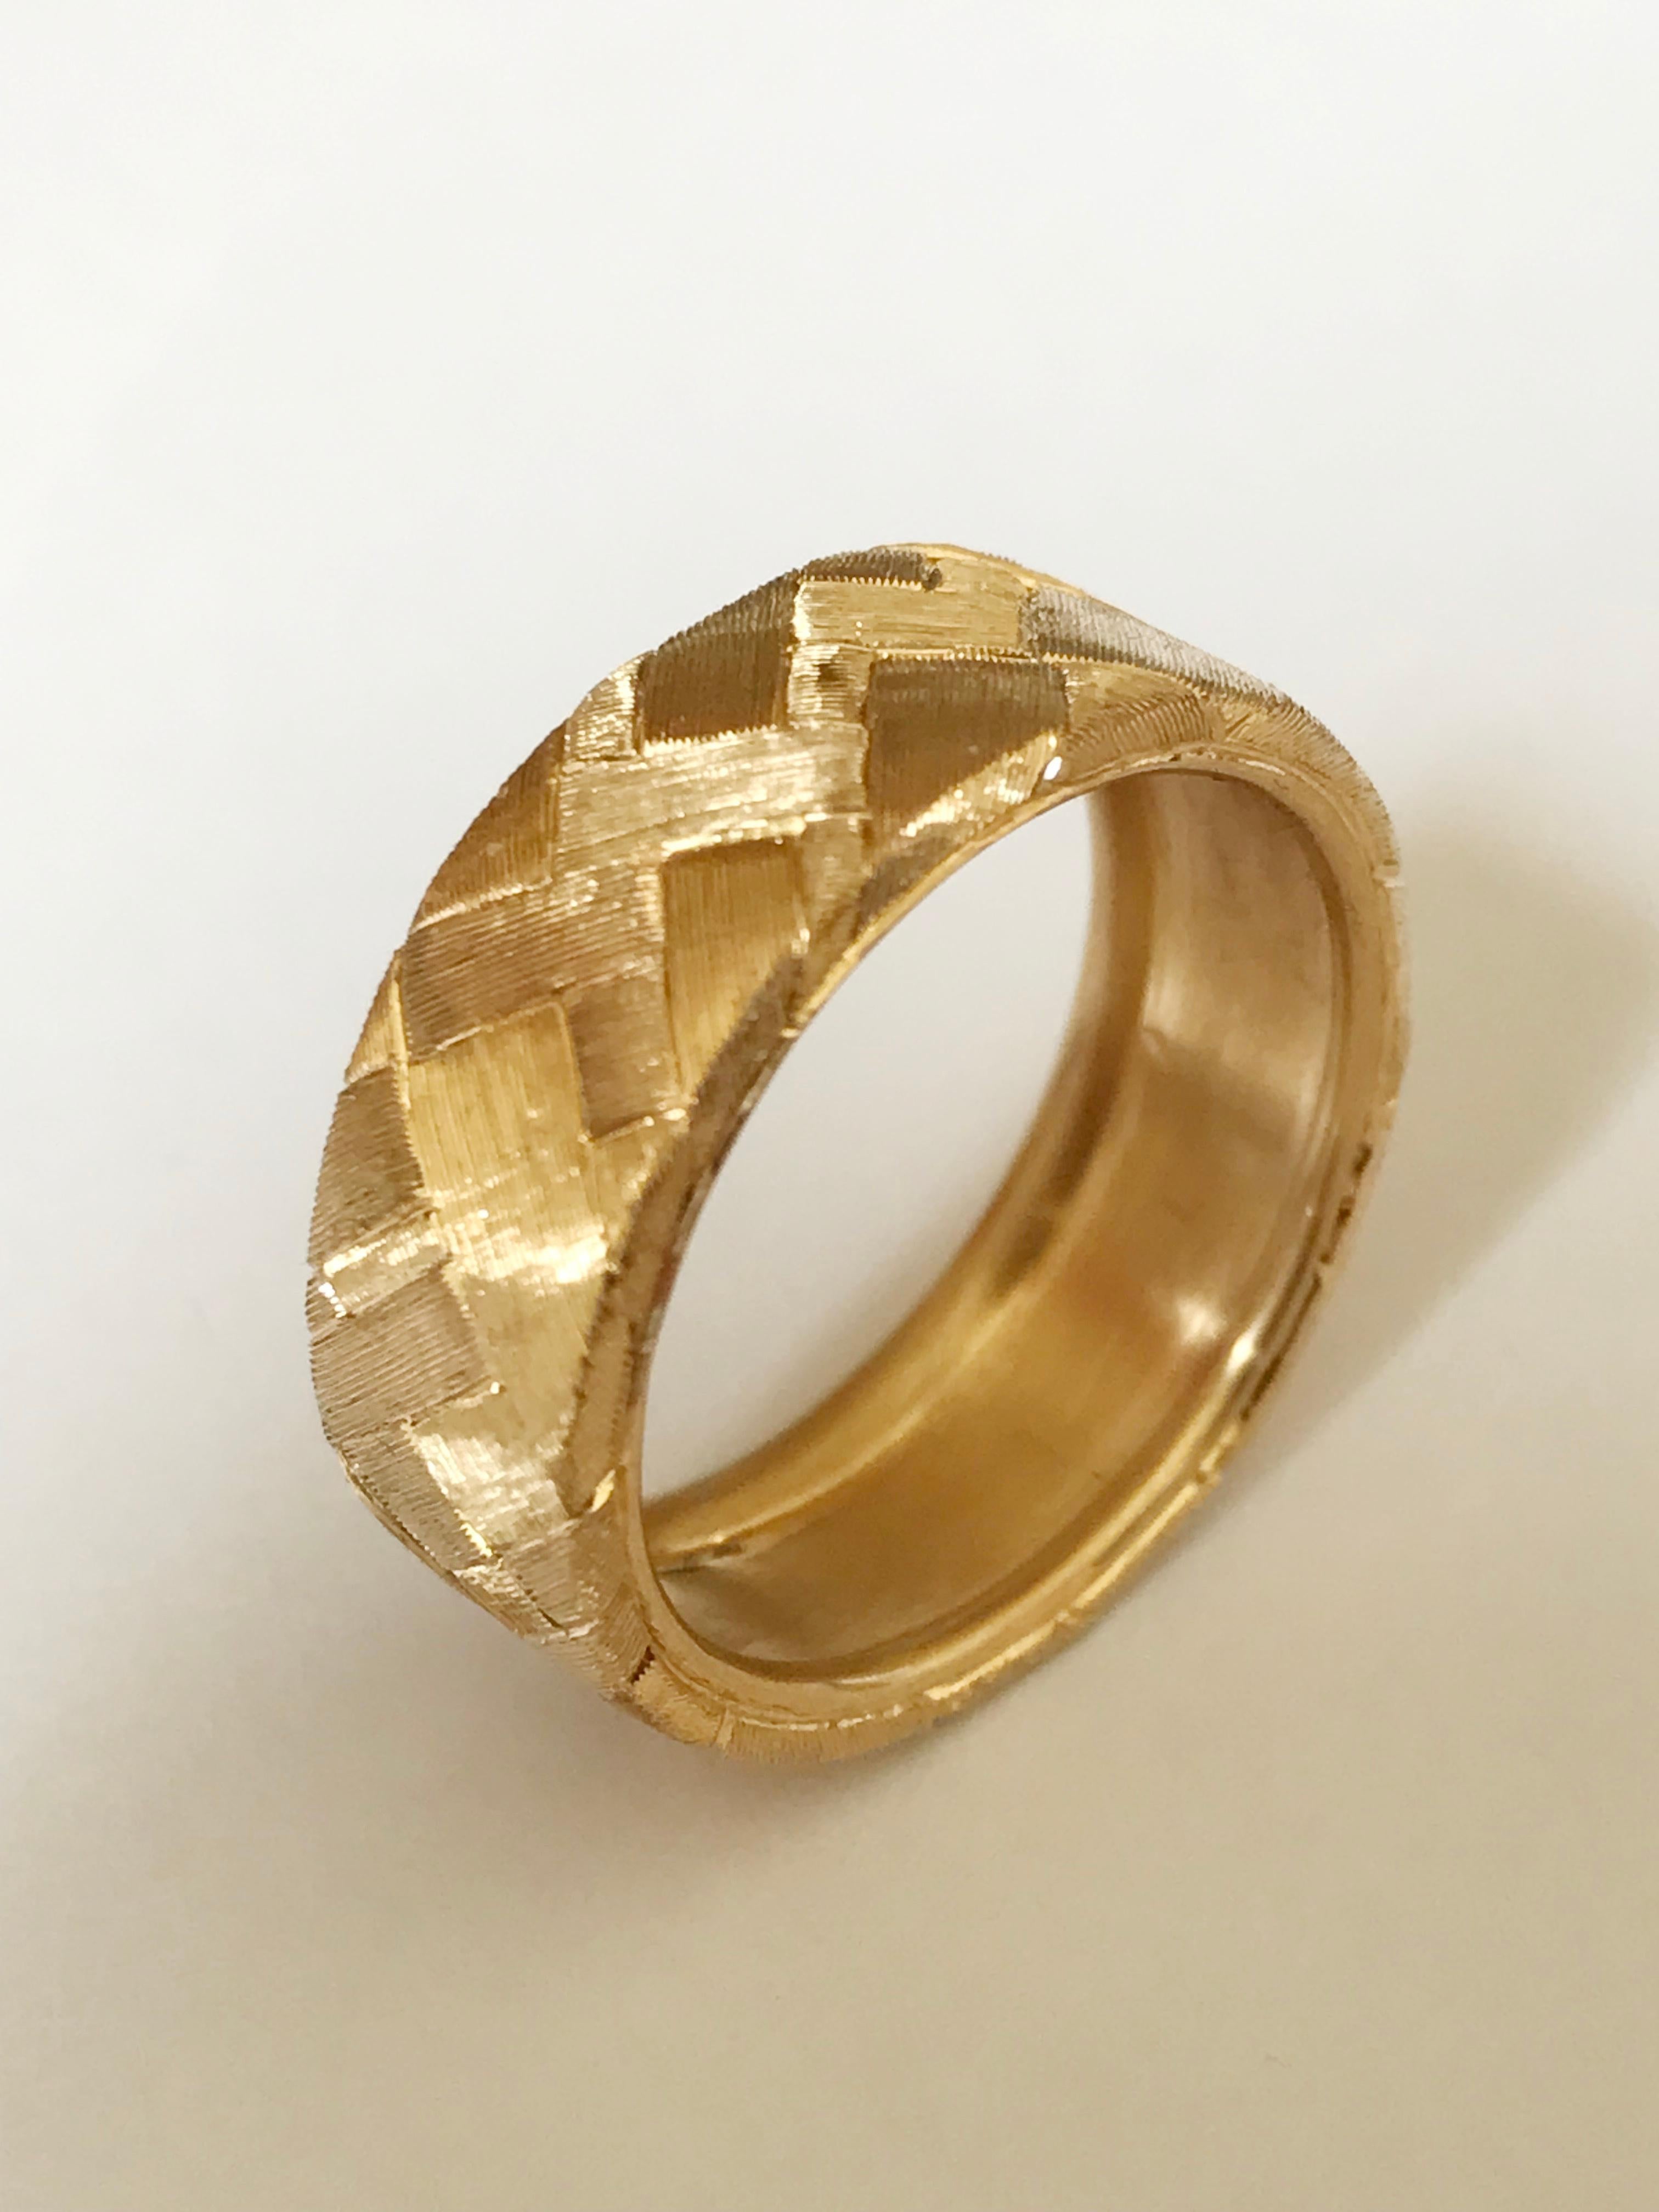 Dalben Hand Engraved Gold Band Ring For Sale 2